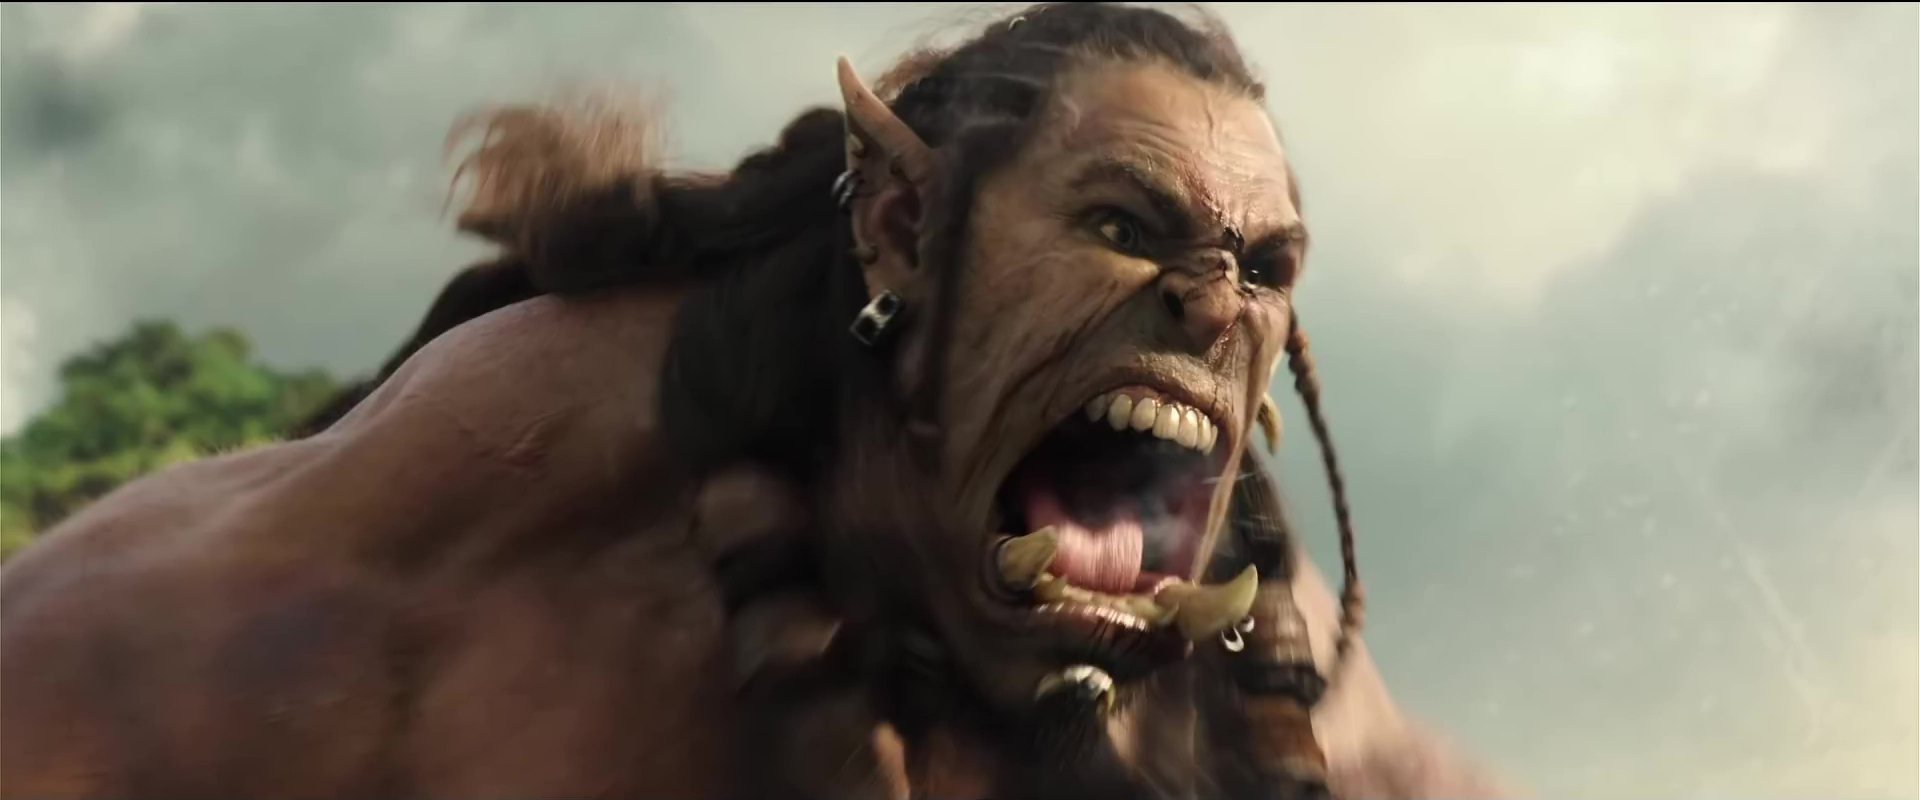 Warcraft Movie Durotan Nominated for 15th Annual VES Awards